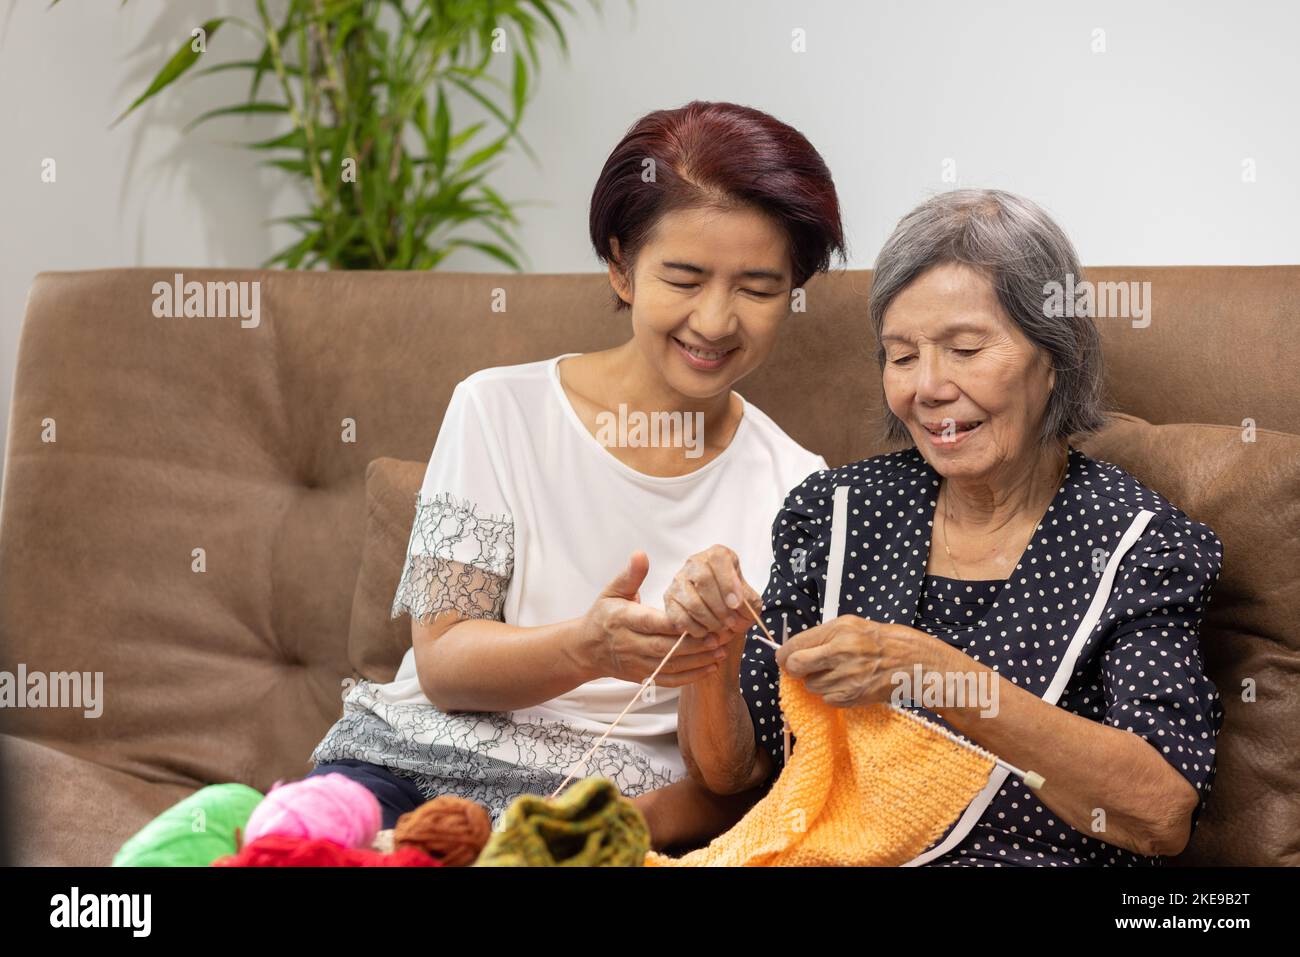 Elderly woman and daughter knitting together for protect dementia and memory loss. Stock Photo